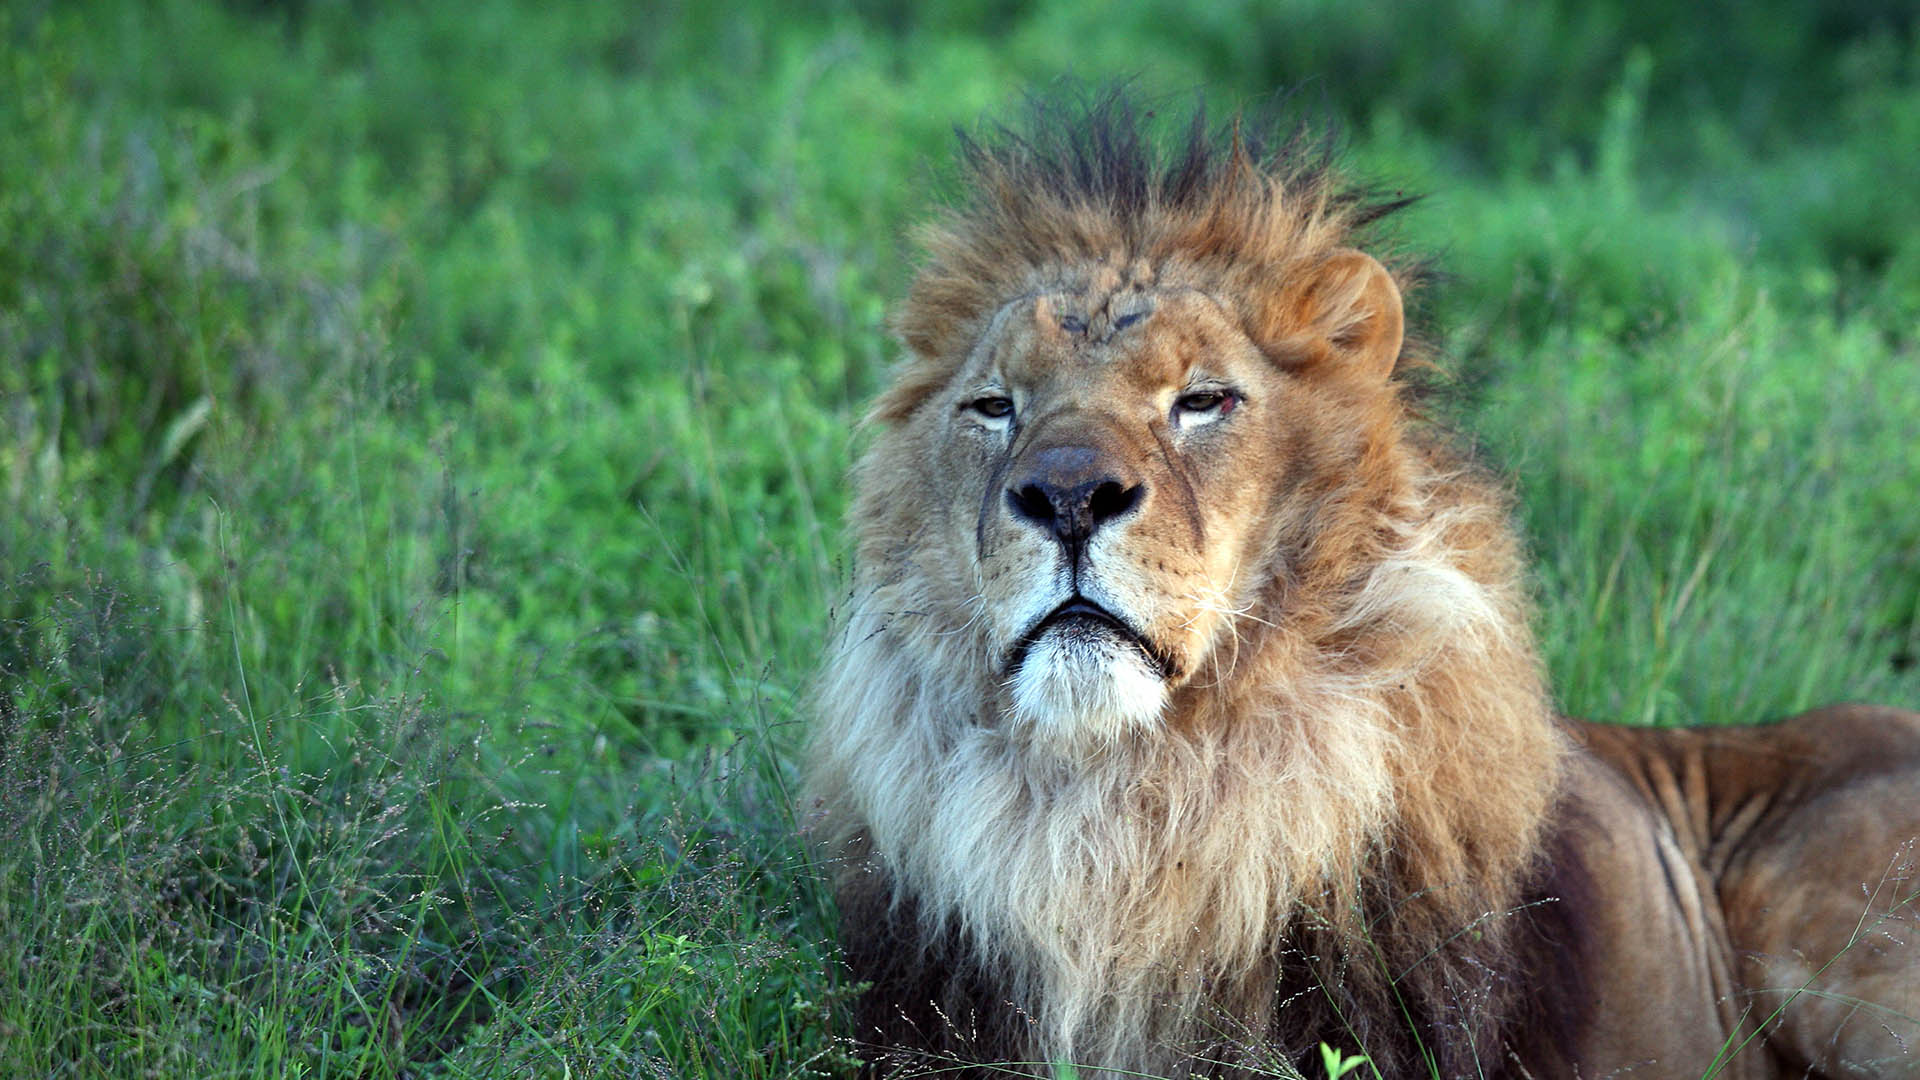 A male lion sits with head raised against a grassy backdrop